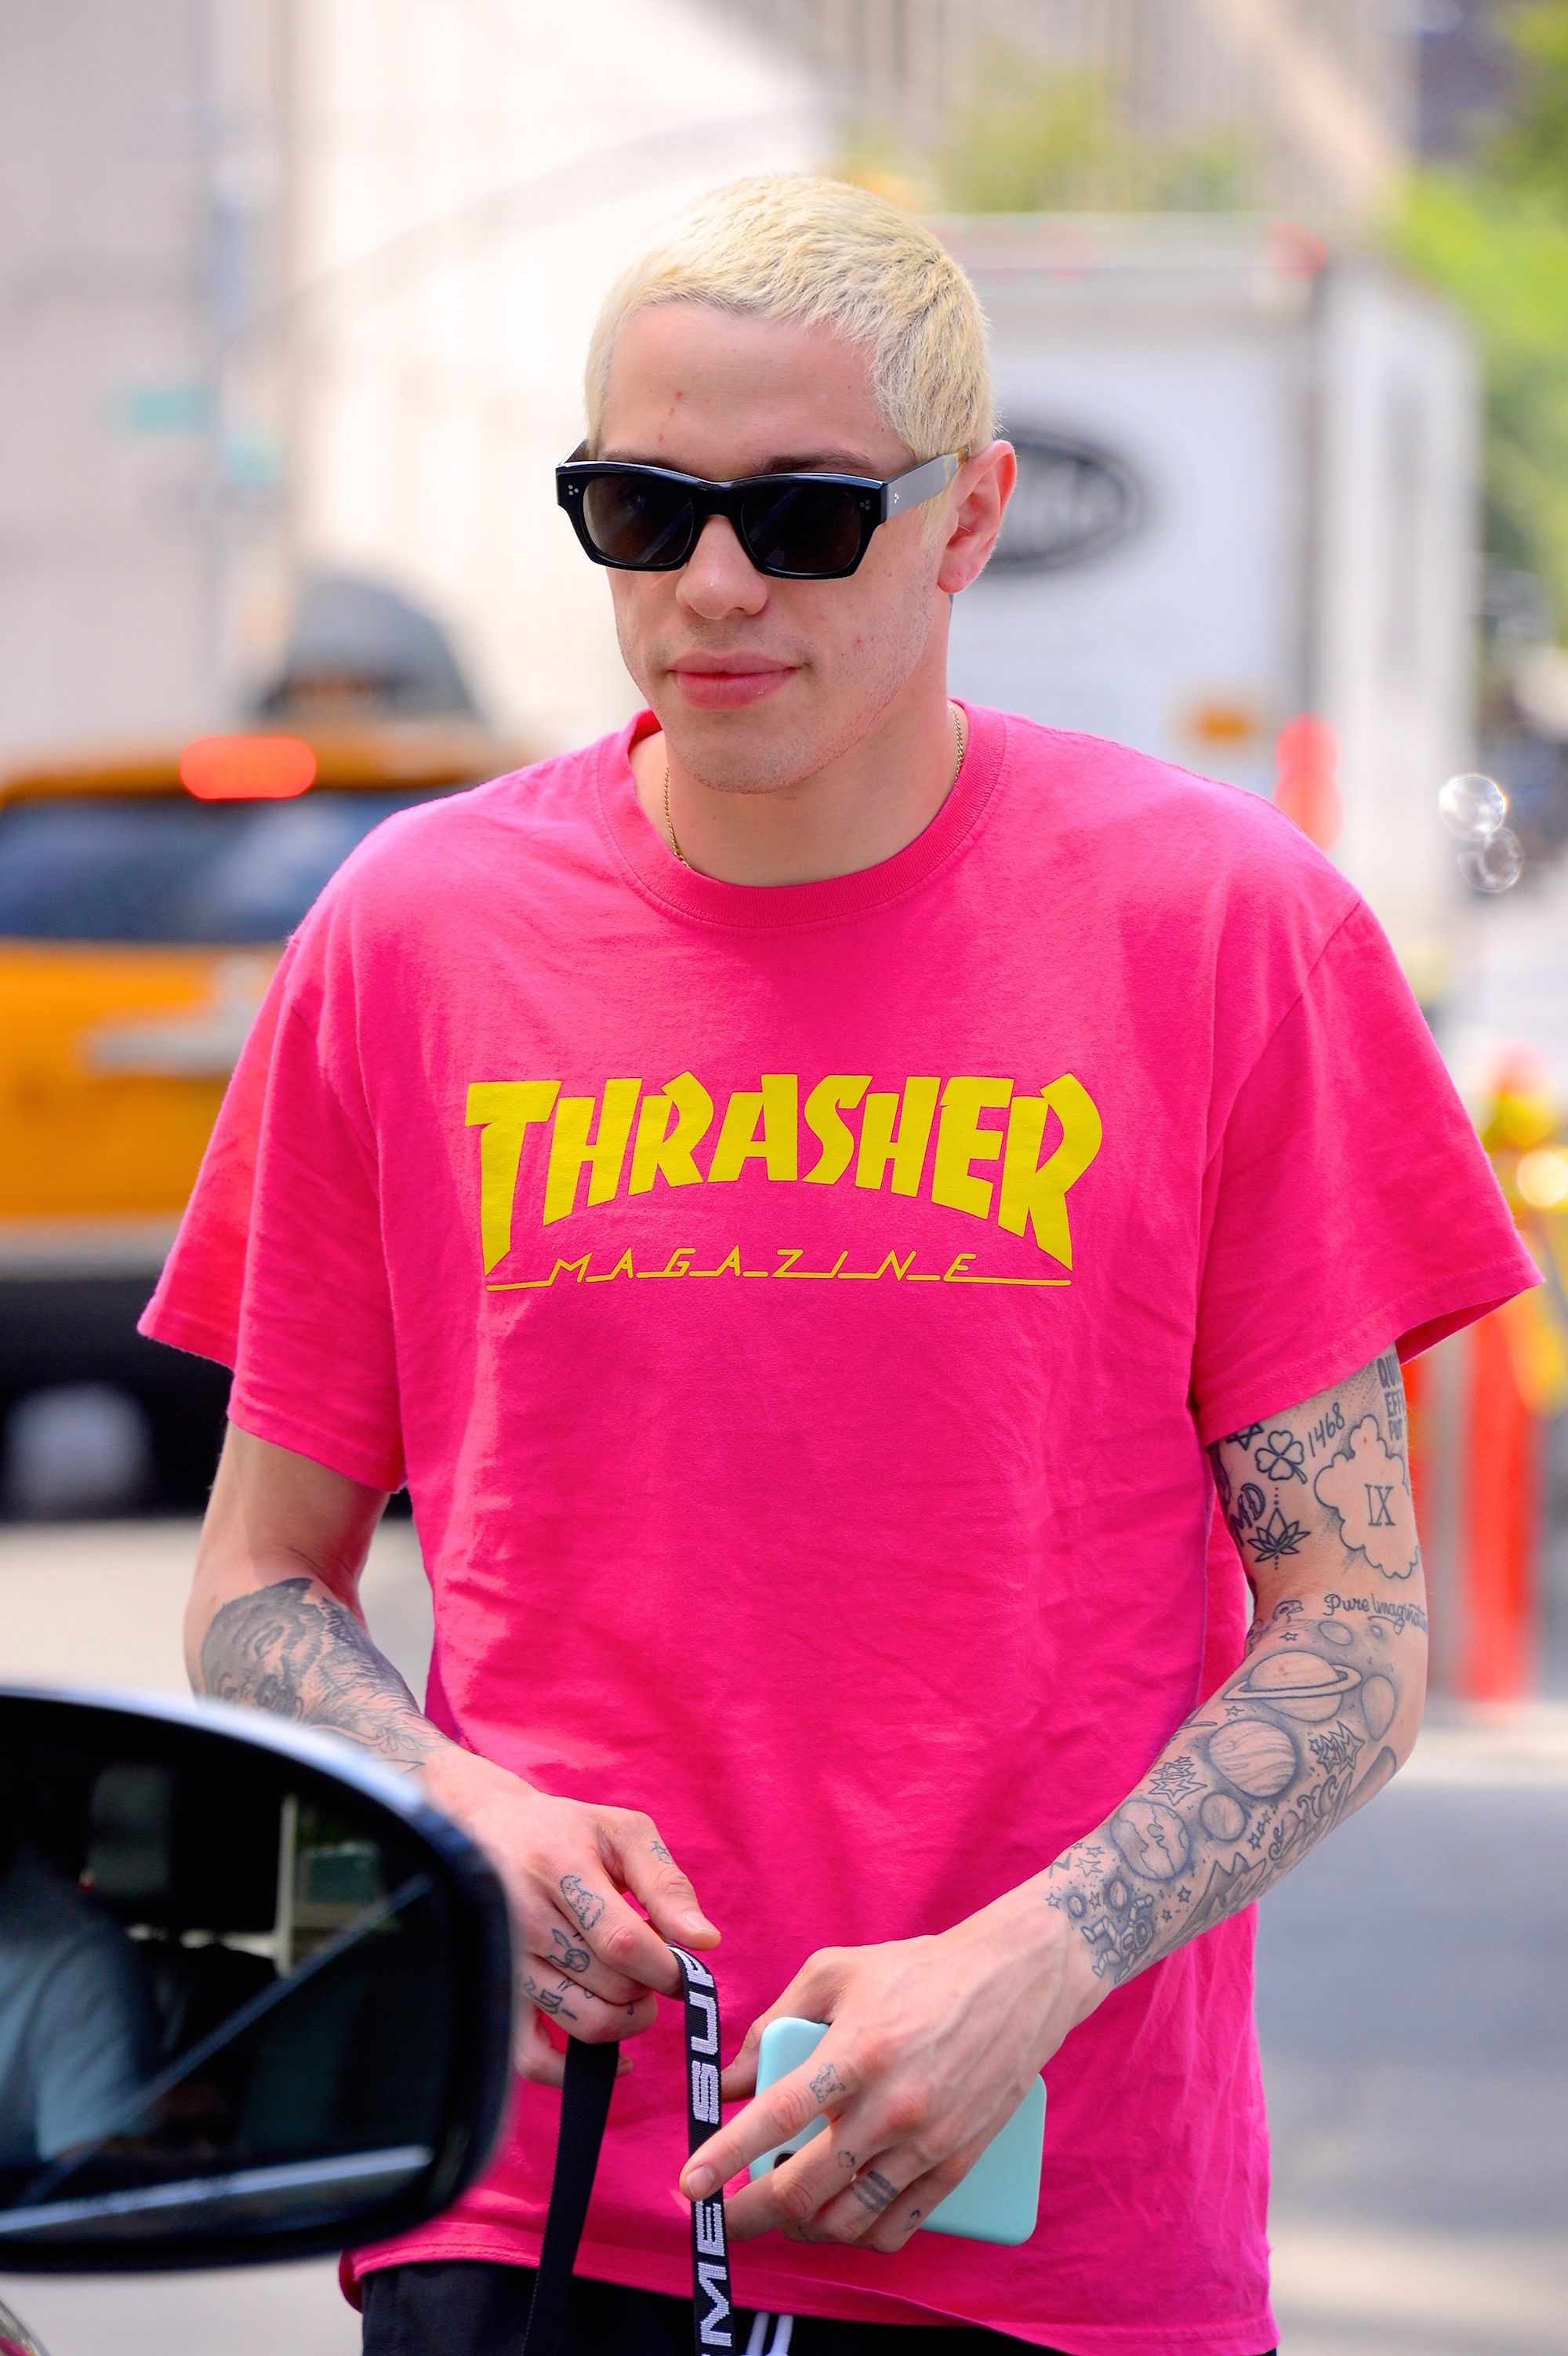 Pete Davidson and Justin Bieber's Style Is On the Rise